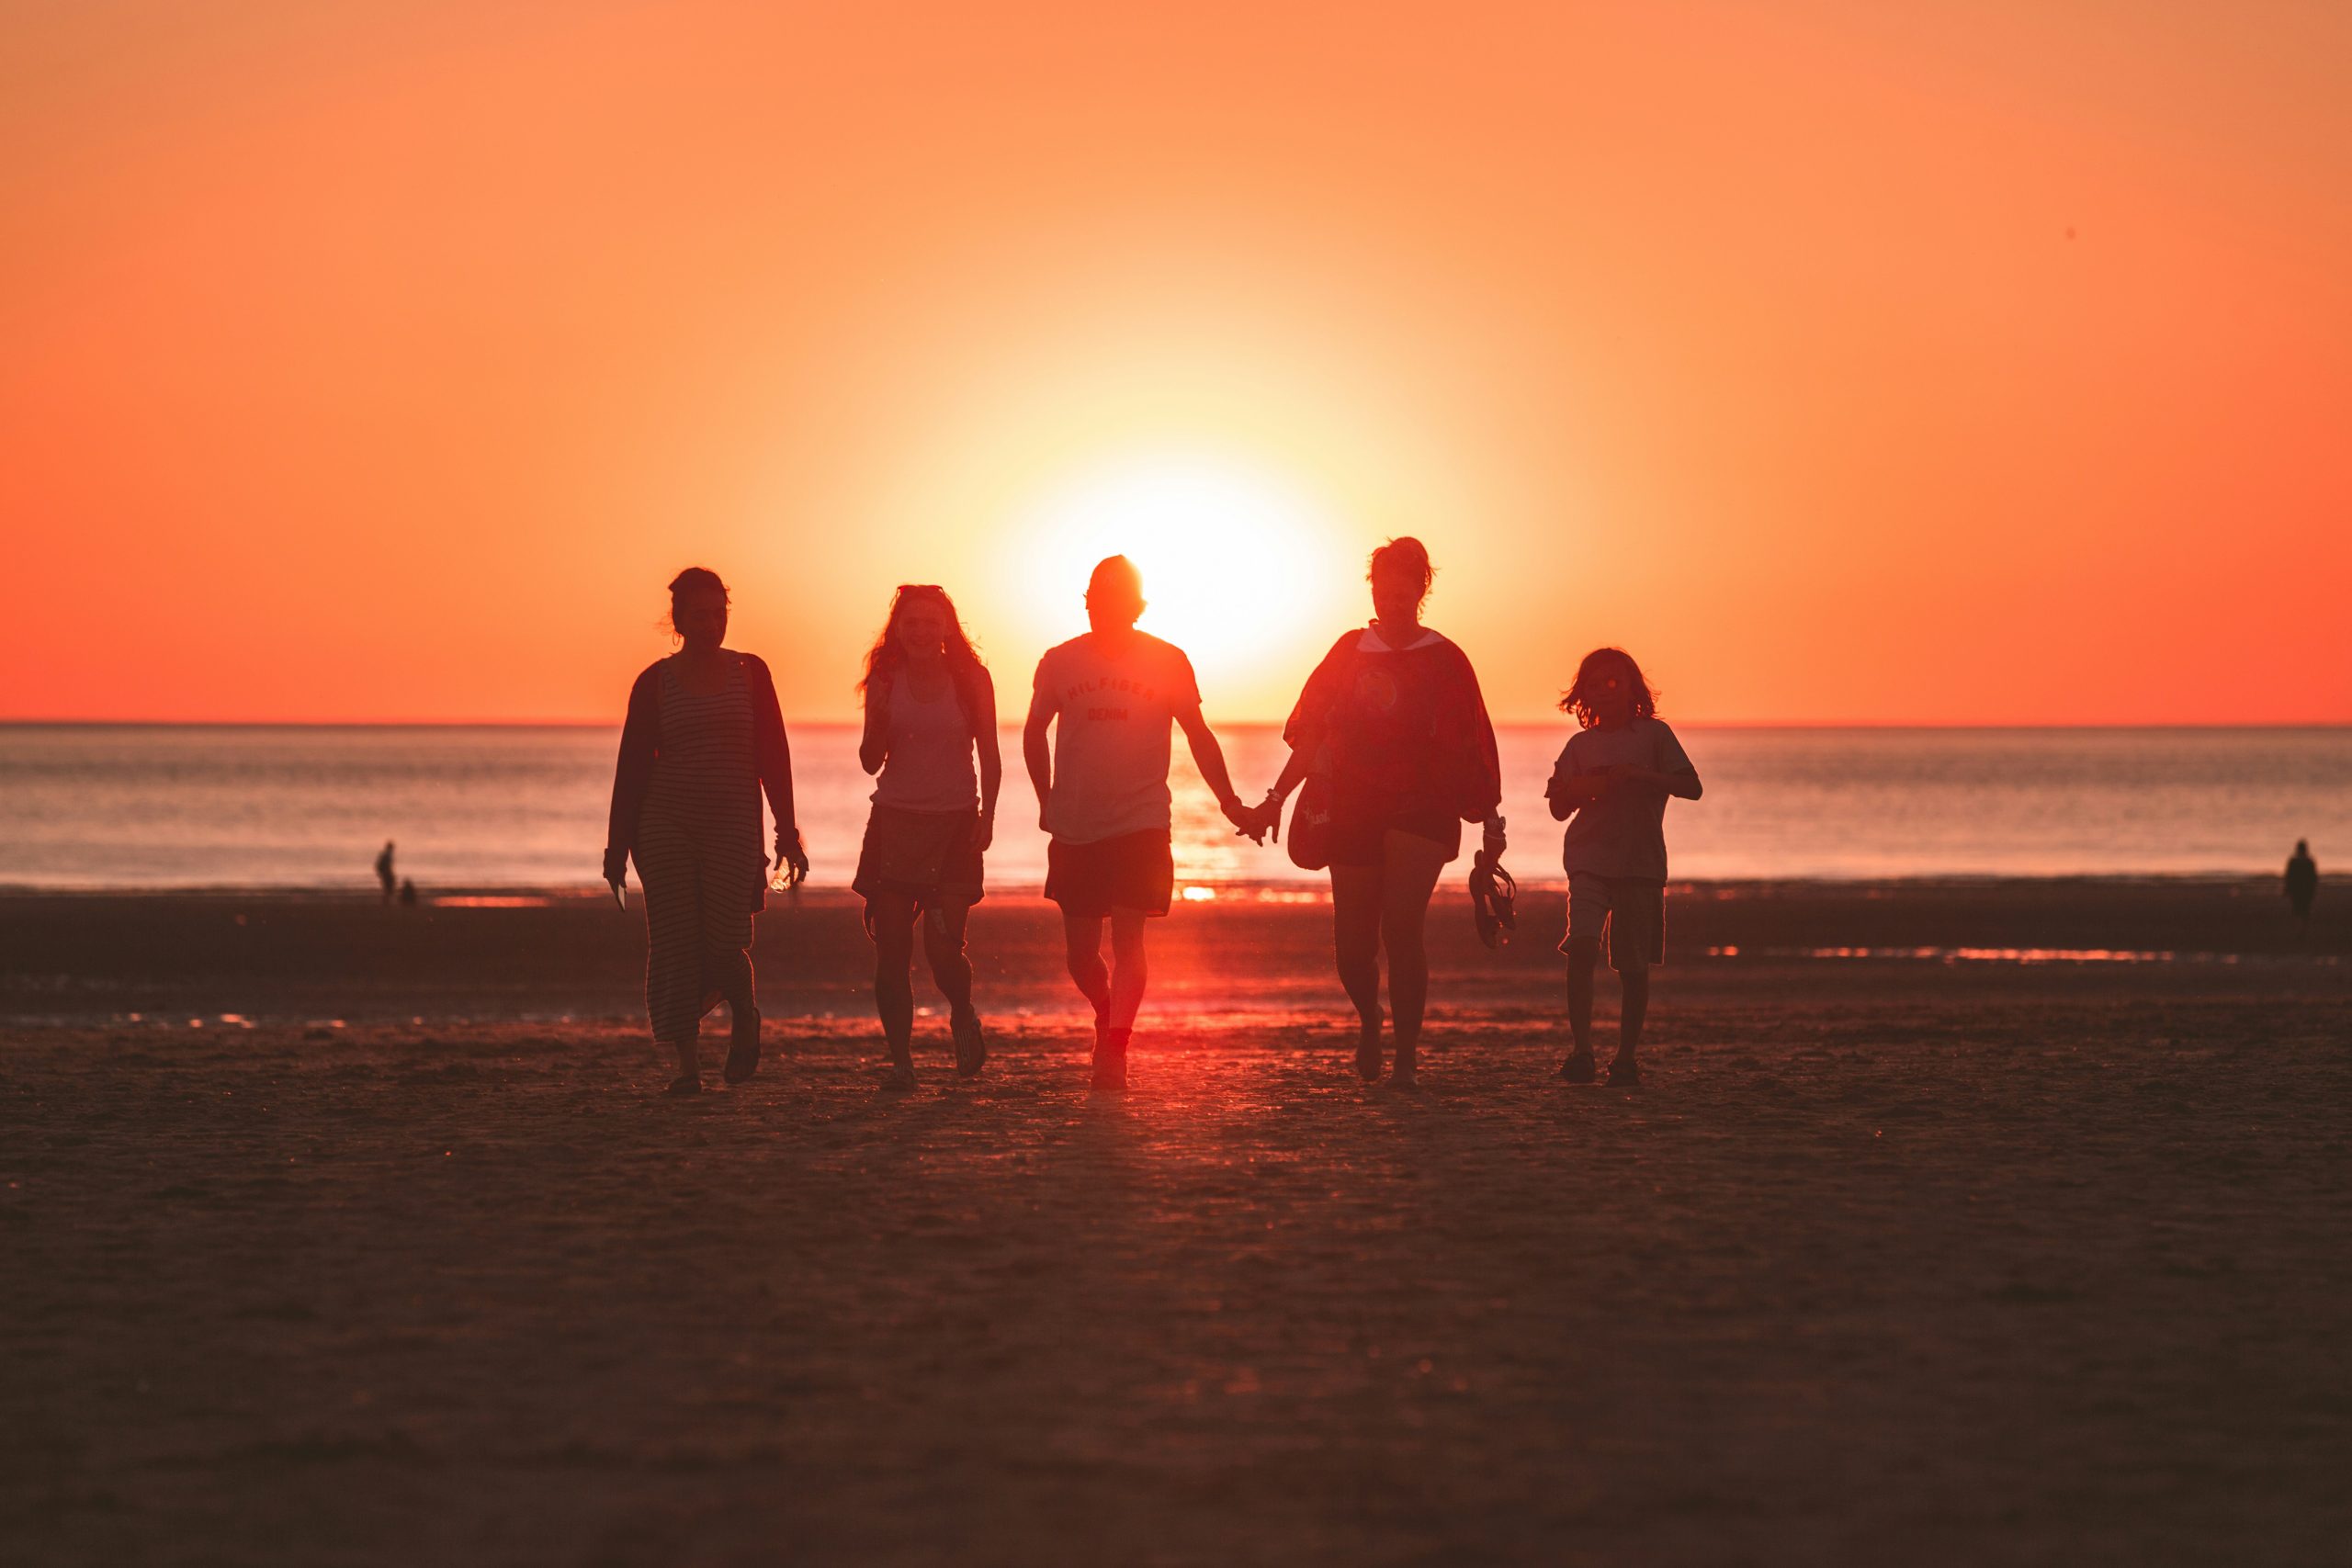 discover the joy of family travel with our helpful tips and destination recommendations. plan unforgettable vacations that the whole family will love.